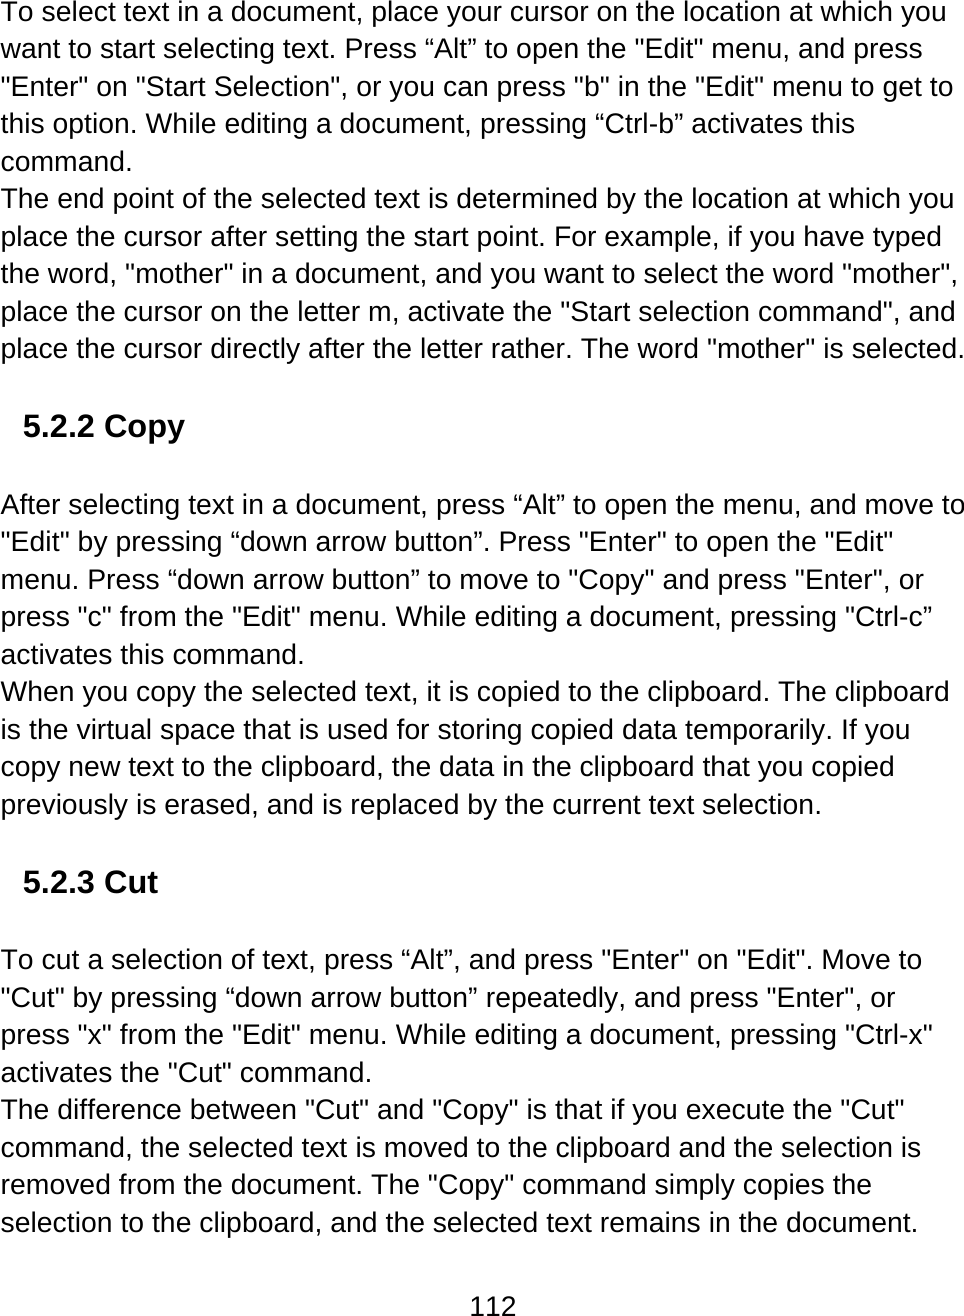 112  To select text in a document, place your cursor on the location at which you want to start selecting text. Press “Alt” to open the &quot;Edit&quot; menu, and press &quot;Enter&quot; on &quot;Start Selection&quot;, or you can press &quot;b&quot; in the &quot;Edit&quot; menu to get to this option. While editing a document, pressing “Ctrl-b” activates this command.  The end point of the selected text is determined by the location at which you place the cursor after setting the start point. For example, if you have typed the word, &quot;mother&quot; in a document, and you want to select the word &quot;mother&quot;, place the cursor on the letter m, activate the &quot;Start selection command&quot;, and place the cursor directly after the letter rather. The word &quot;mother&quot; is selected.   5.2.2 Copy  After selecting text in a document, press “Alt” to open the menu, and move to &quot;Edit&quot; by pressing “down arrow button”. Press &quot;Enter&quot; to open the &quot;Edit&quot; menu. Press “down arrow button” to move to &quot;Copy&quot; and press &quot;Enter&quot;, or press &quot;c&quot; from the &quot;Edit&quot; menu. While editing a document, pressing &quot;Ctrl-c” activates this command. When you copy the selected text, it is copied to the clipboard. The clipboard is the virtual space that is used for storing copied data temporarily. If you copy new text to the clipboard, the data in the clipboard that you copied previously is erased, and is replaced by the current text selection.   5.2.3 Cut  To cut a selection of text, press “Alt”, and press &quot;Enter&quot; on &quot;Edit&quot;. Move to &quot;Cut&quot; by pressing “down arrow button” repeatedly, and press &quot;Enter&quot;, or press &quot;x&quot; from the &quot;Edit&quot; menu. While editing a document, pressing &quot;Ctrl-x&quot; activates the &quot;Cut&quot; command. The difference between &quot;Cut&quot; and &quot;Copy&quot; is that if you execute the &quot;Cut&quot; command, the selected text is moved to the clipboard and the selection is removed from the document. The &quot;Copy&quot; command simply copies the selection to the clipboard, and the selected text remains in the document.  